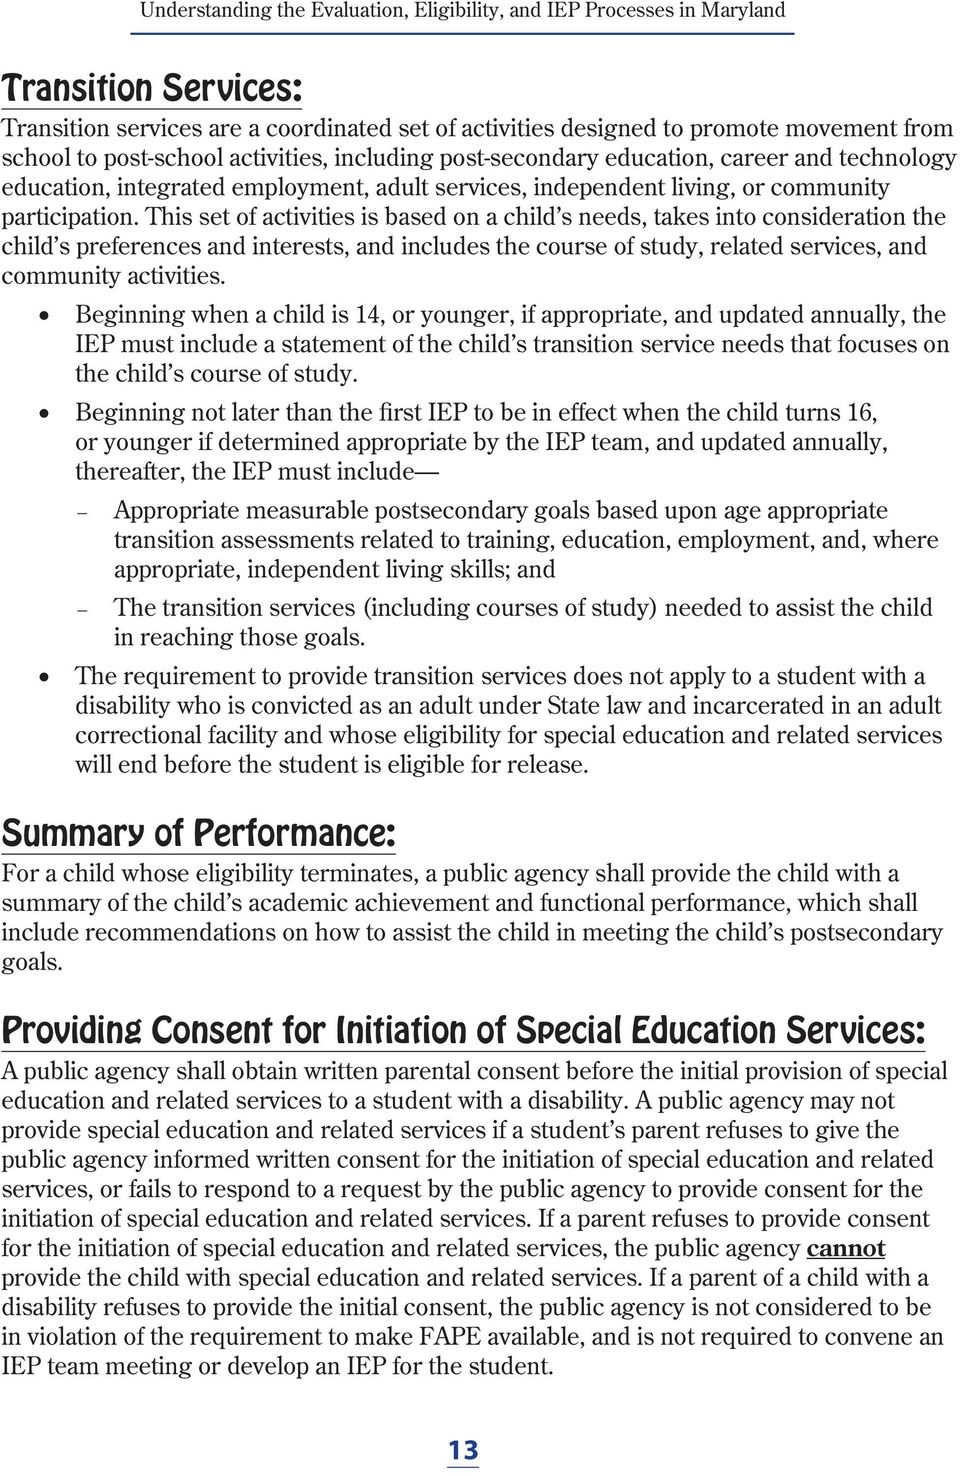 This set of activities is based on a child s needs, takes into consideration the child s preferences and interests, and includes the course of study, related services, and community activities.